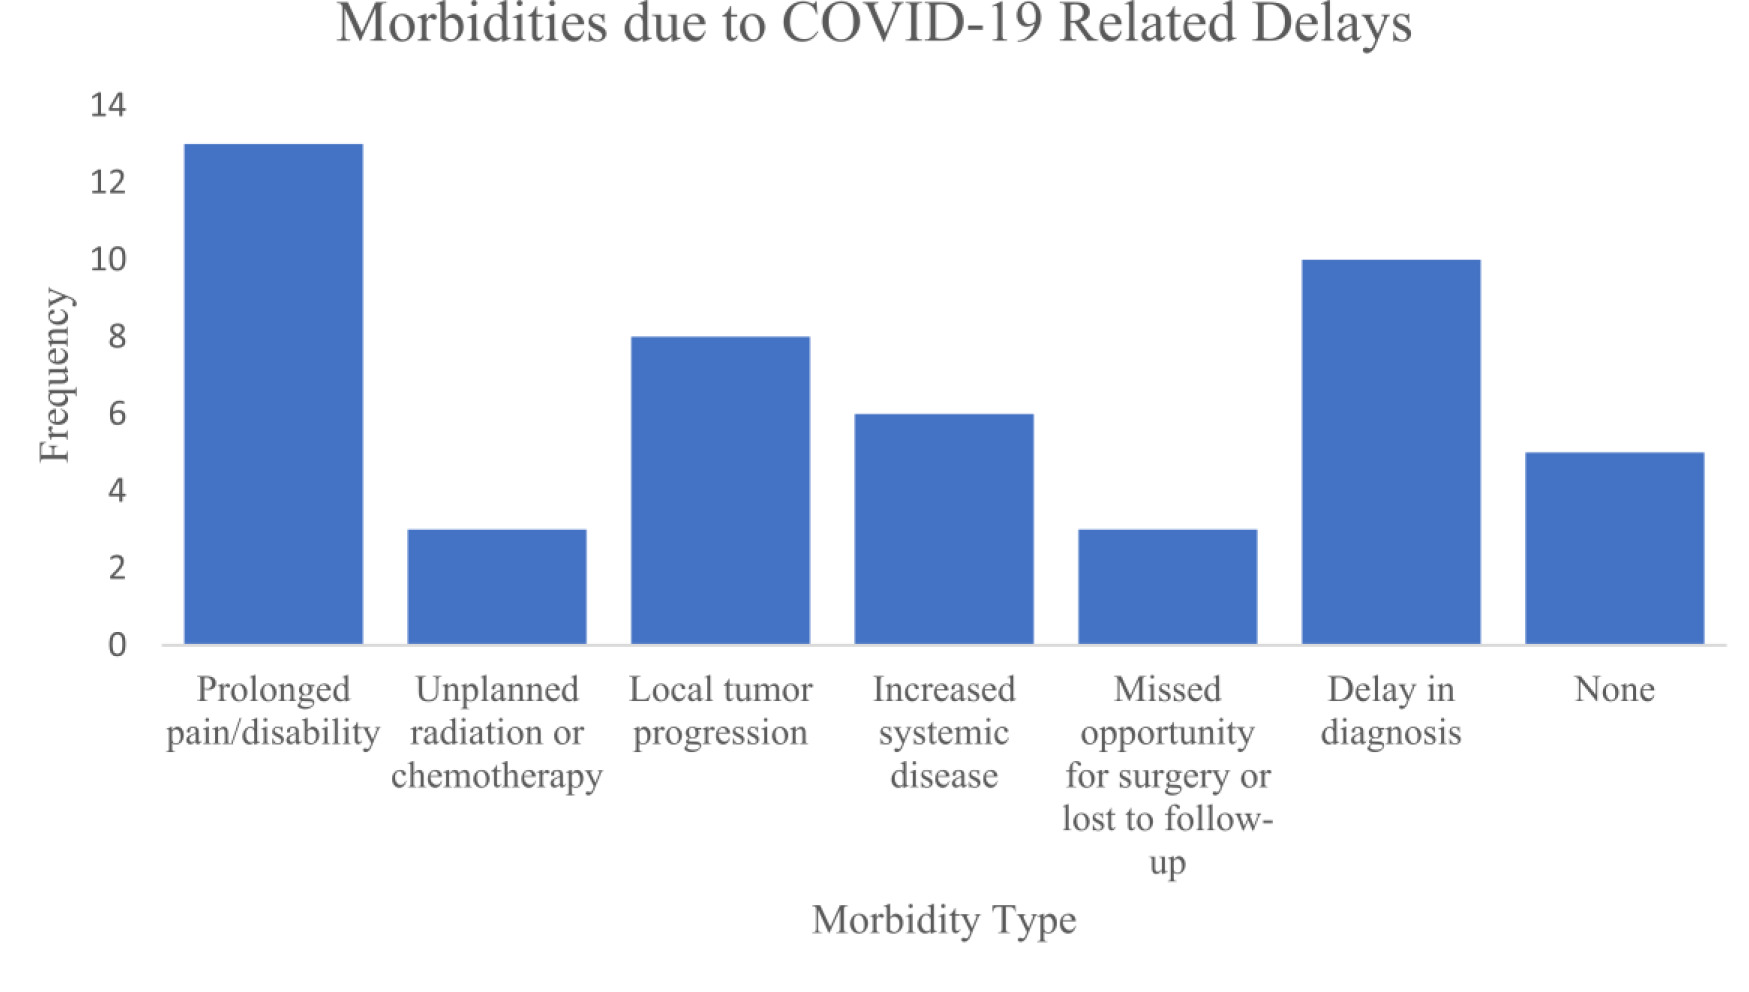 Fig. 1 
          Morbidities due to COVID-19 related delays. The most common morbidity was prolonged pain/disability (52%). The second most common morbidity was a delay in diagnosis (40%).
        